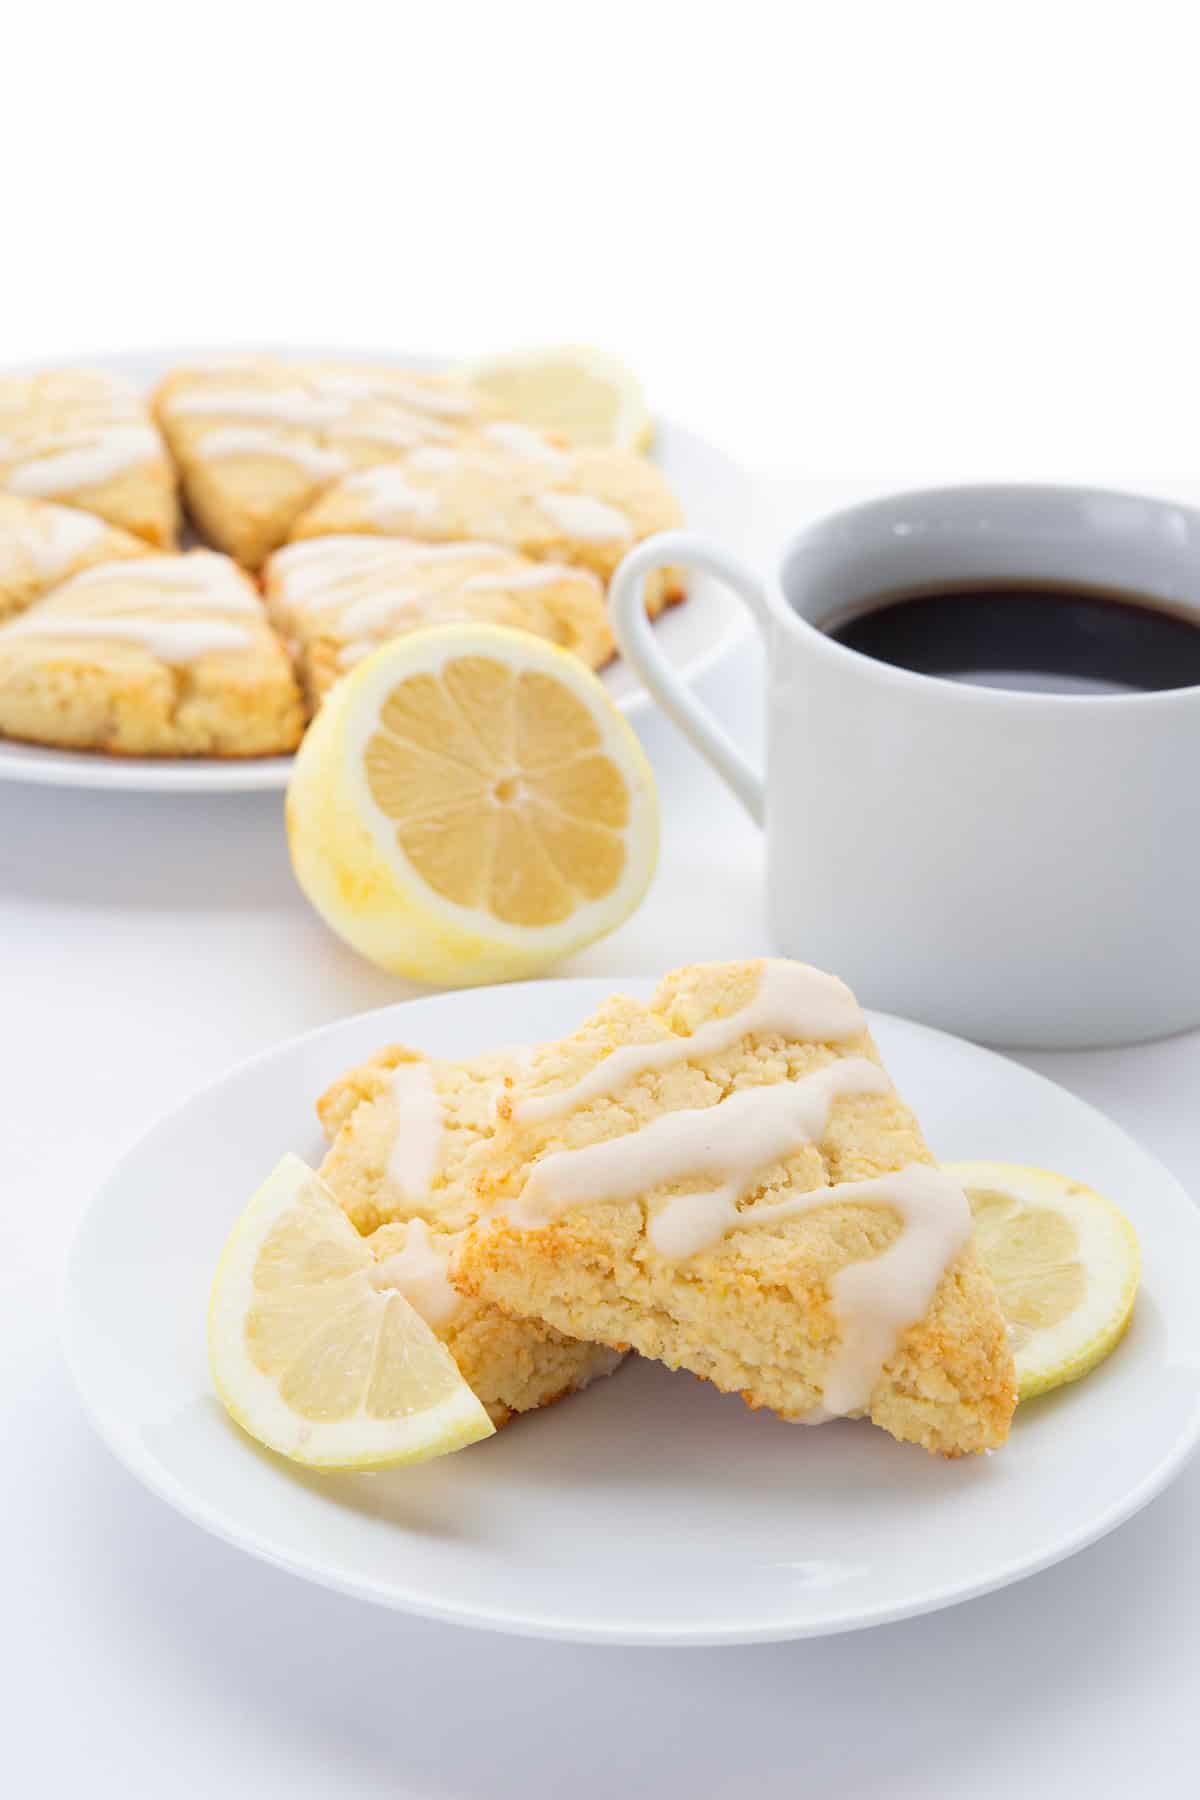 Two Keto Lemon Ricotta Scones on a white plate with a cup of coffee in the background.